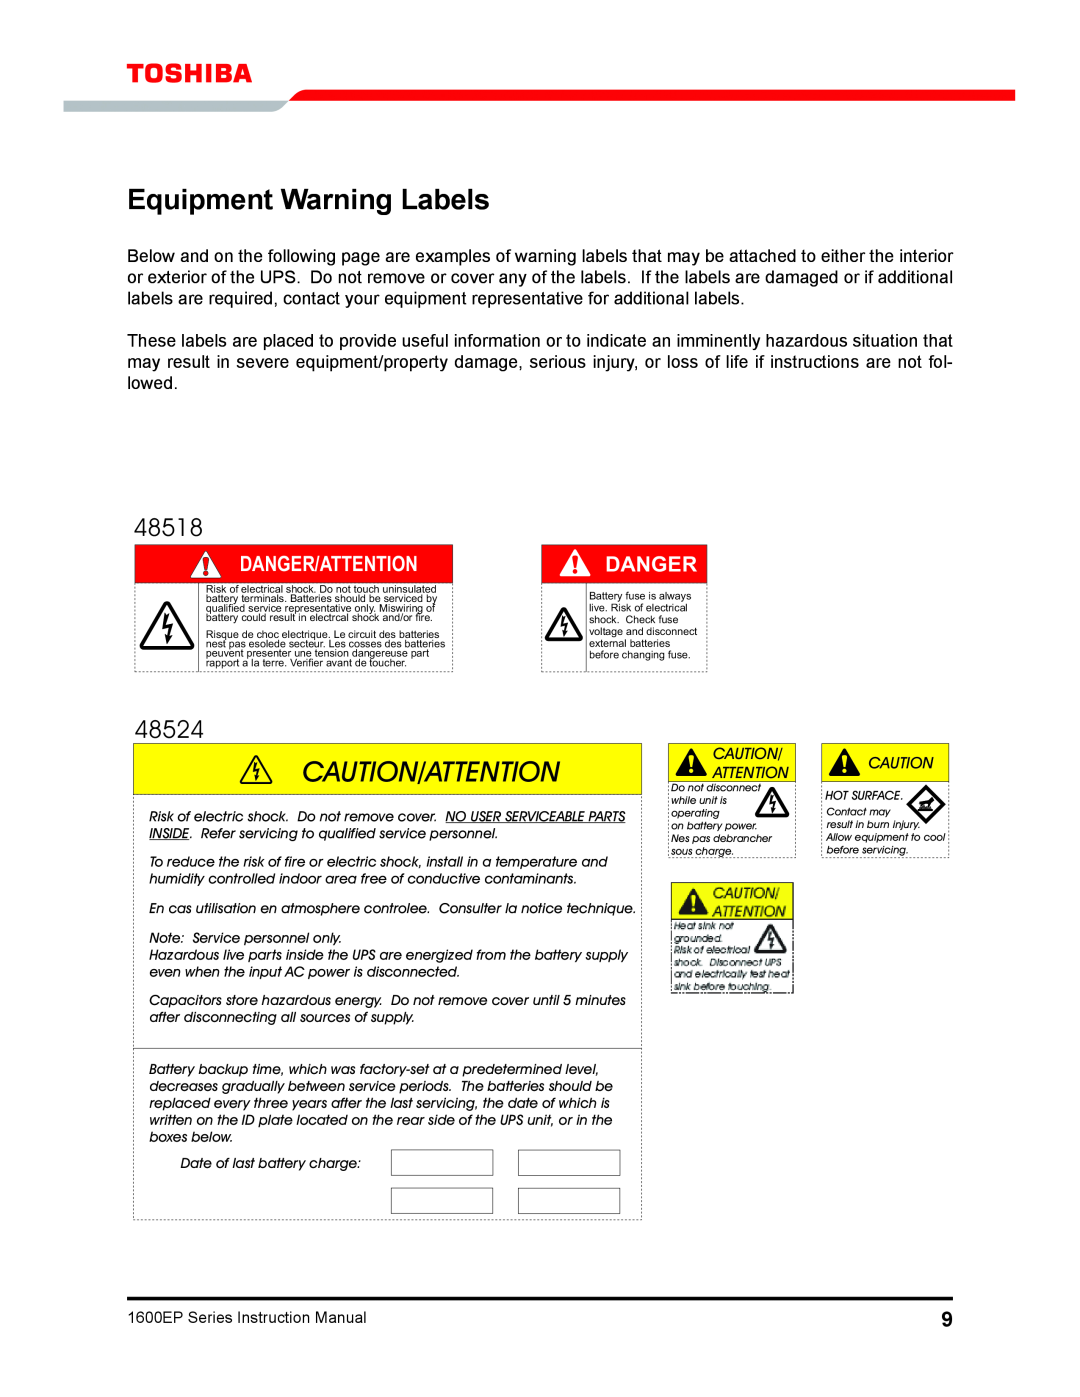 Toshiba 1600EP Series manual Equipment Warning Labels, 48518, 48524, Caution/Attention, Danger/Attention 